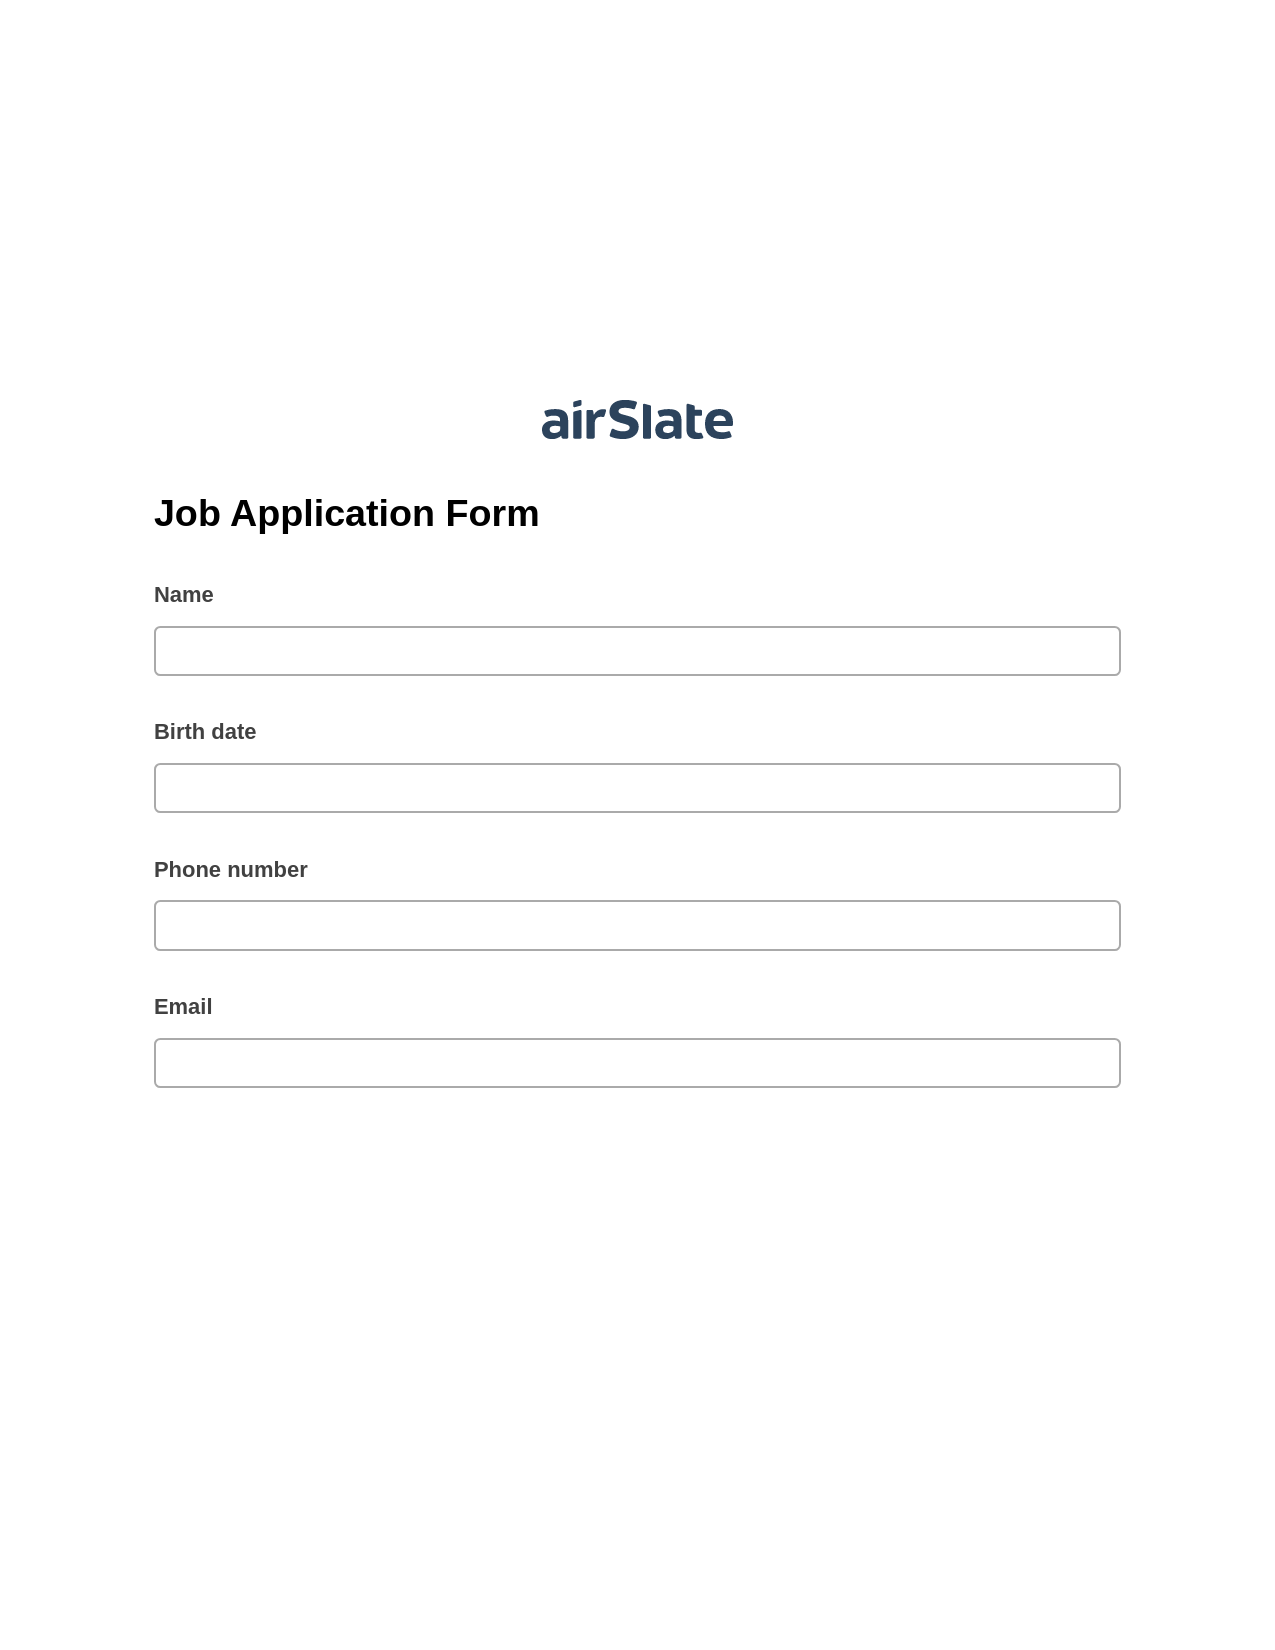 Job Application Form Pre-fill from Excel Spreadsheet Bot, Email Notification Bot, Box Bot